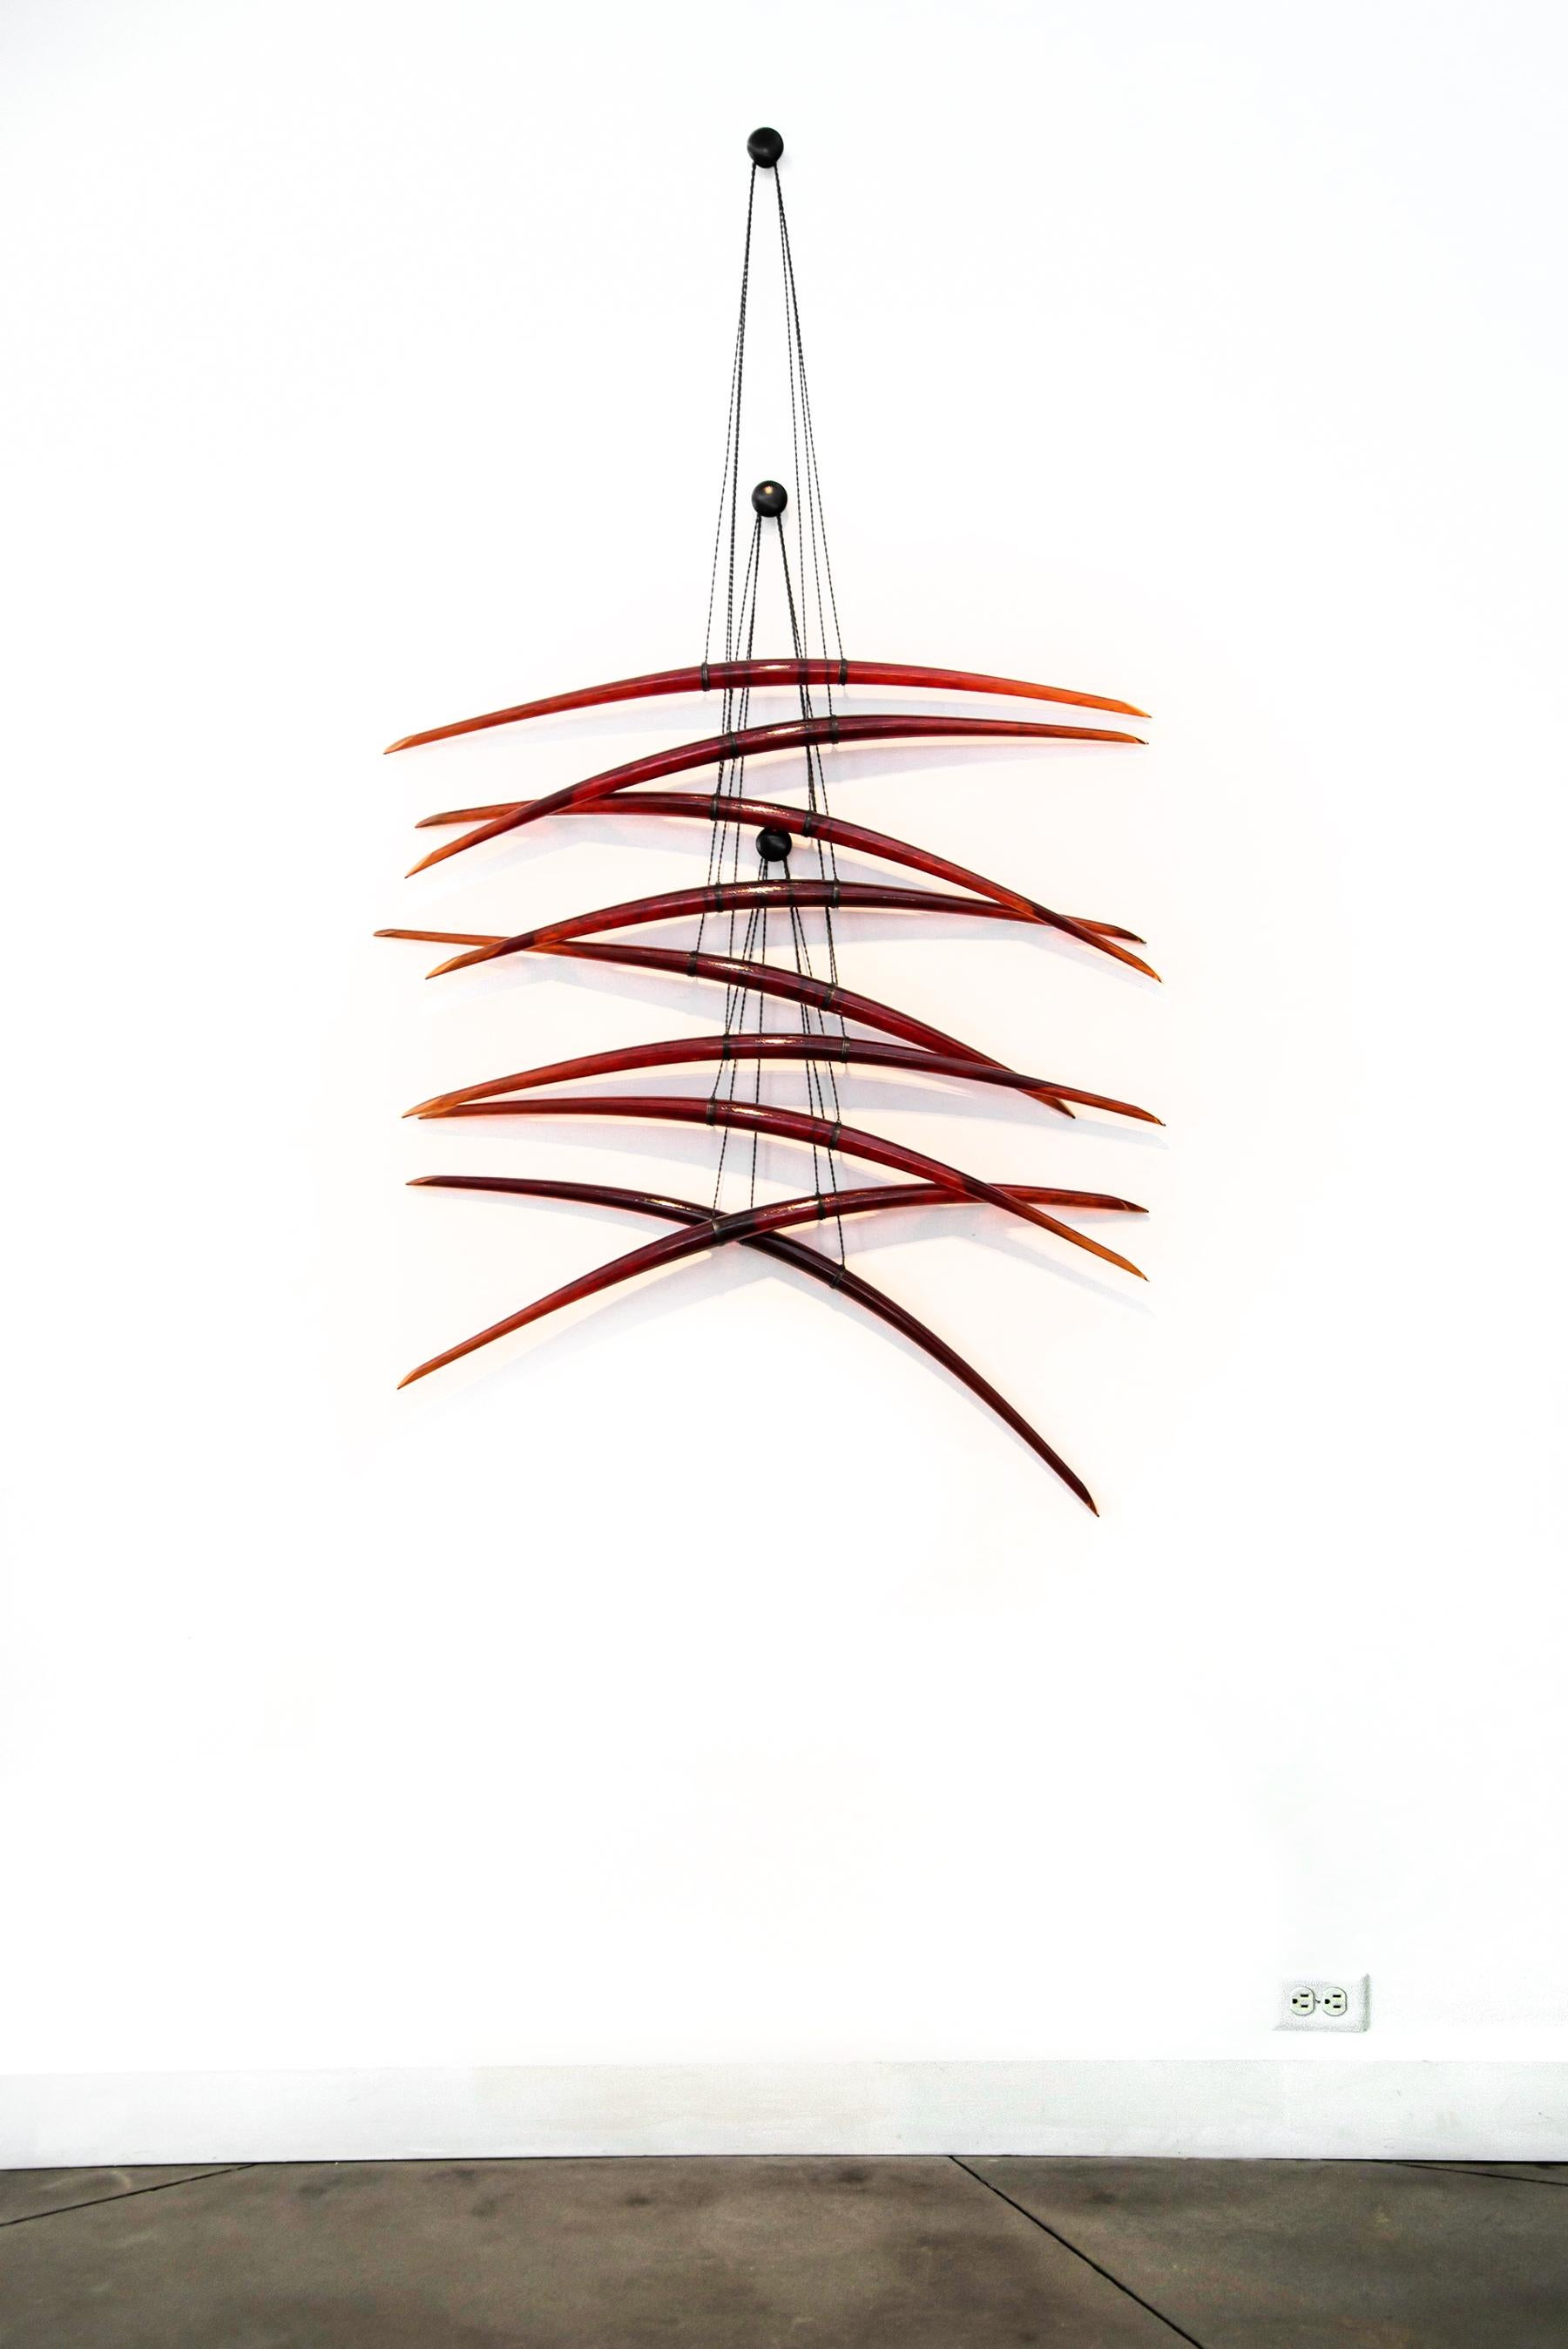 Duality R - dynamic, translucent, red, glass, steel, abstract wall sculpture - Gray Still-Life Sculpture by John Paul Robinson